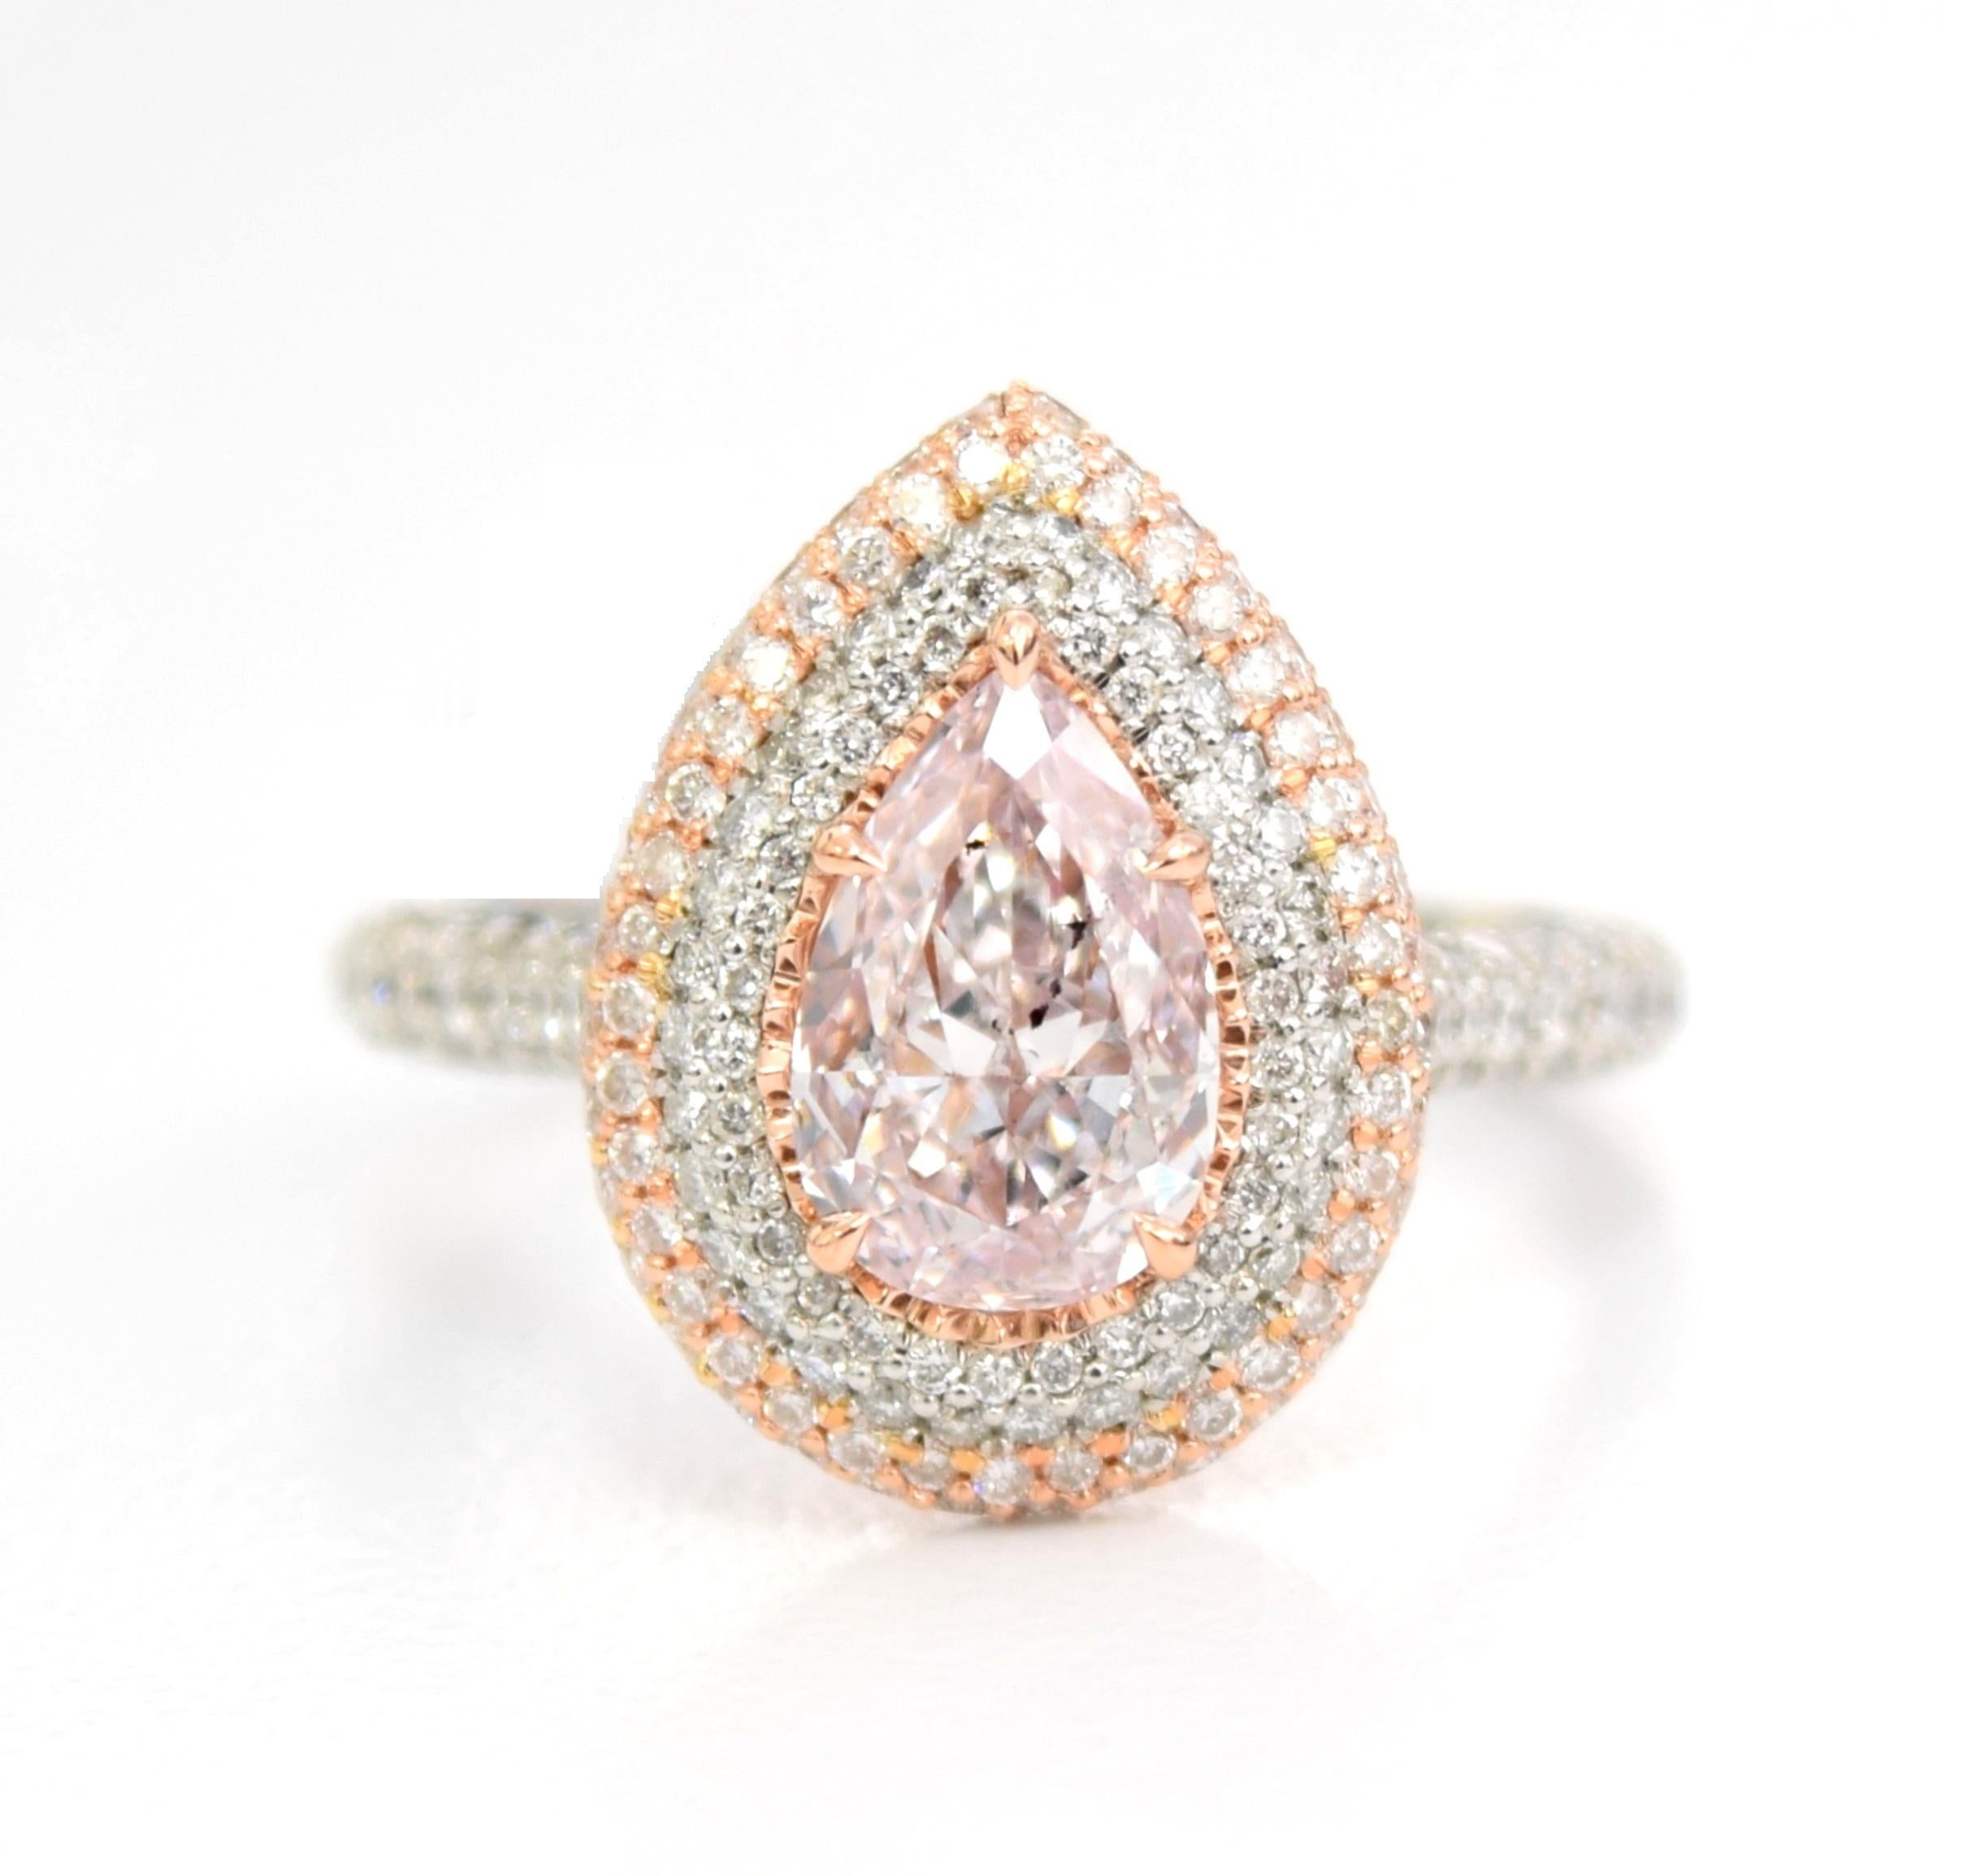 Platinum and 18k white gold engagement ring featuring a GIA graded 1.29ct natural fancy light purplish pink pear shape diamond with a clarity grade of Si2. 
The center diamond is surrounded by 240 round brilliant cut white diamonds weighing 1.21